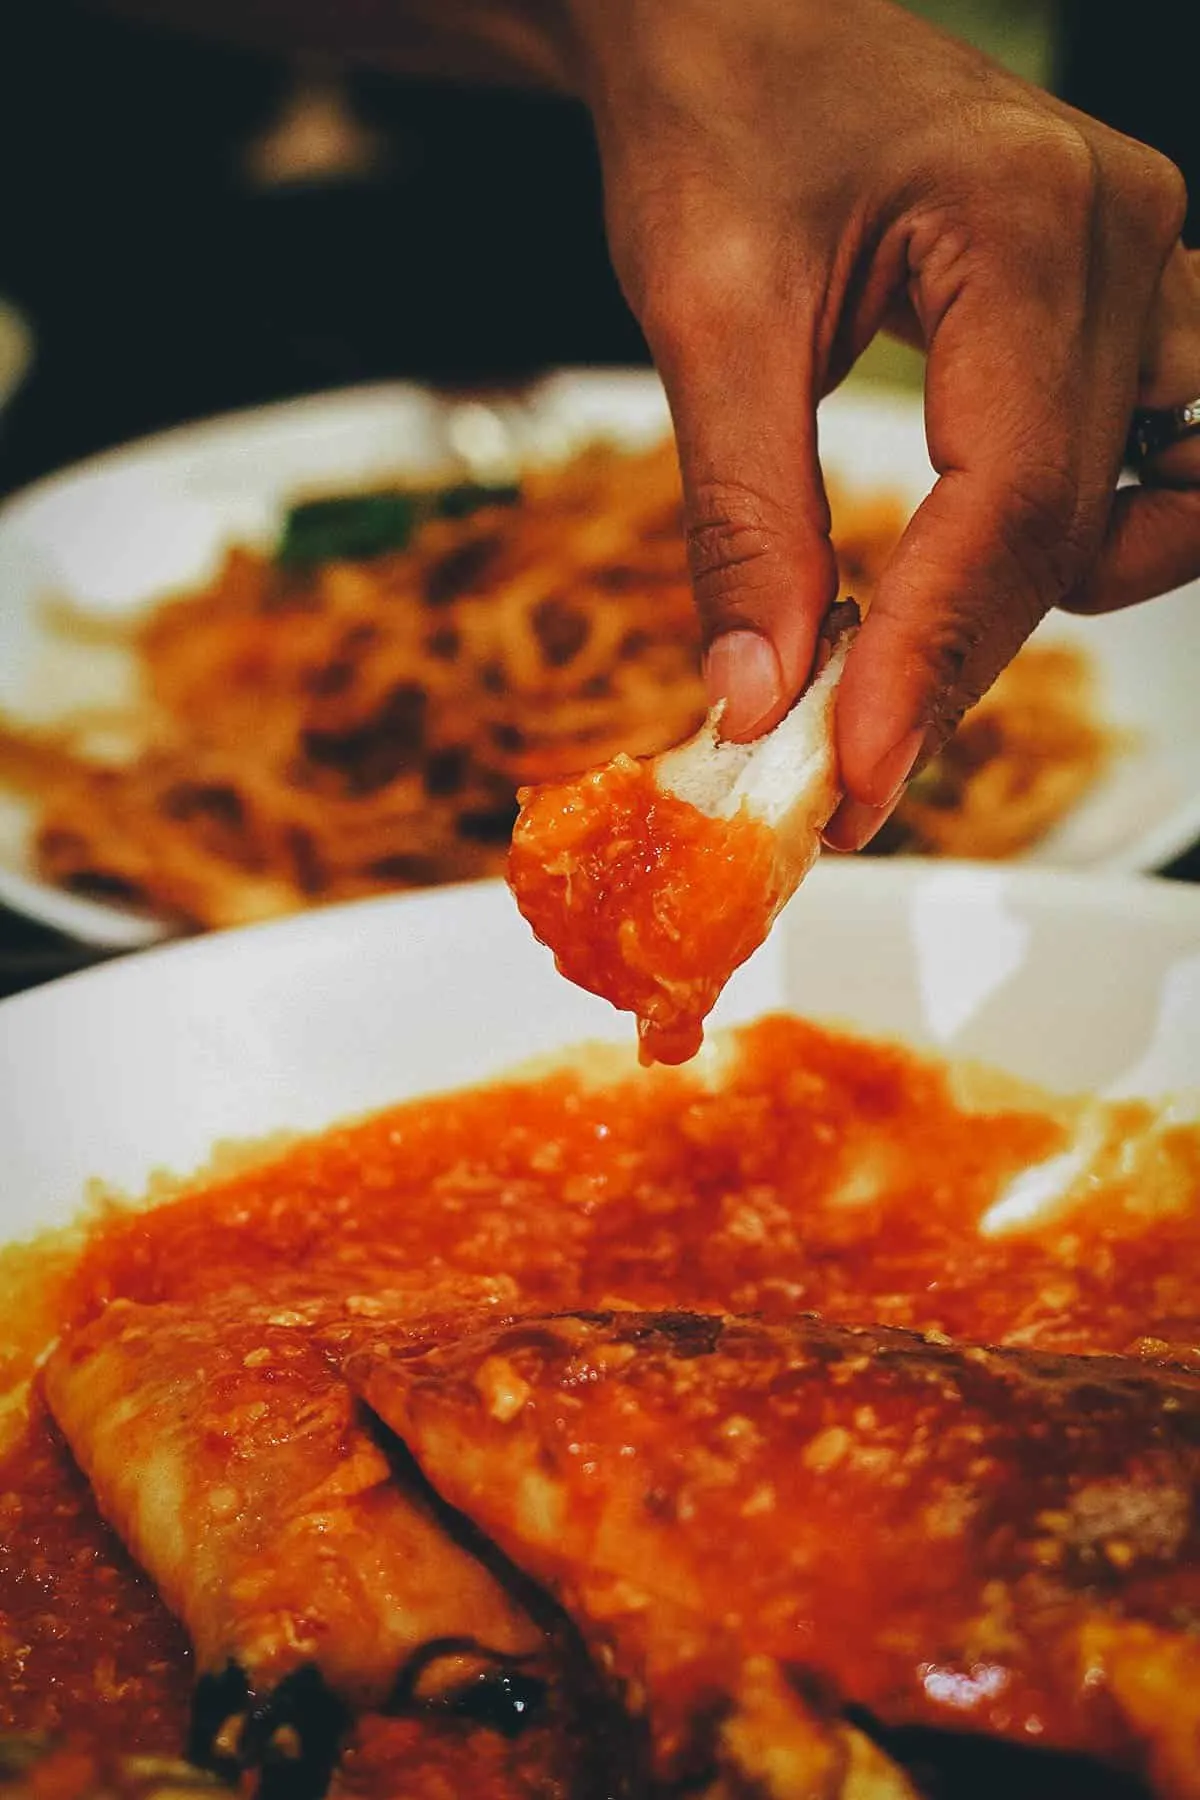 Dipping mantou bread in the crab chili sauce